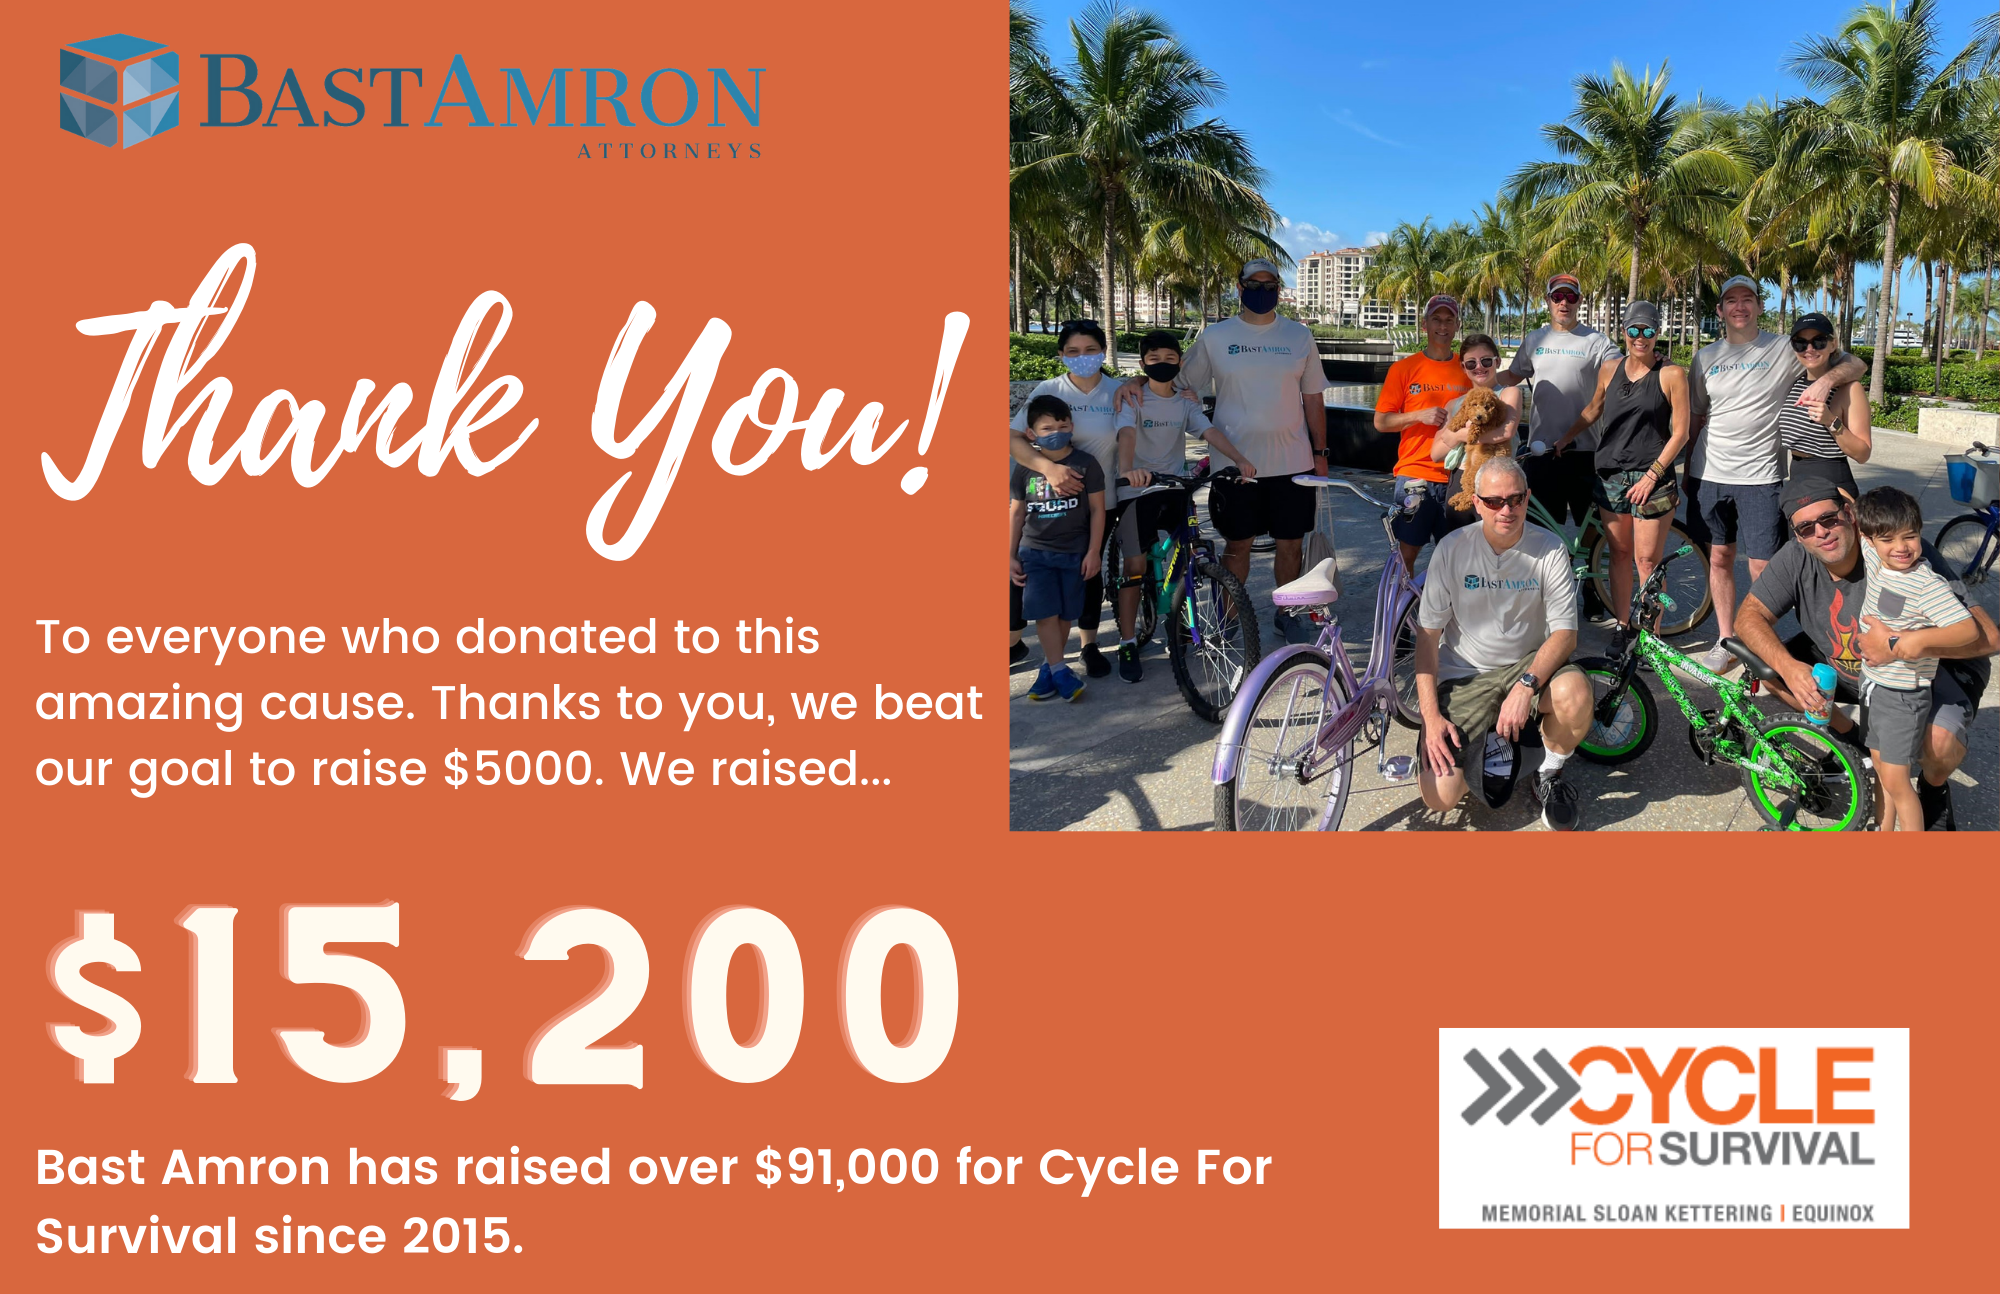 BAST AMRON PARTICIPATED IN CYCLE FOR SURVIVAL AND RAISED OVER $15,200